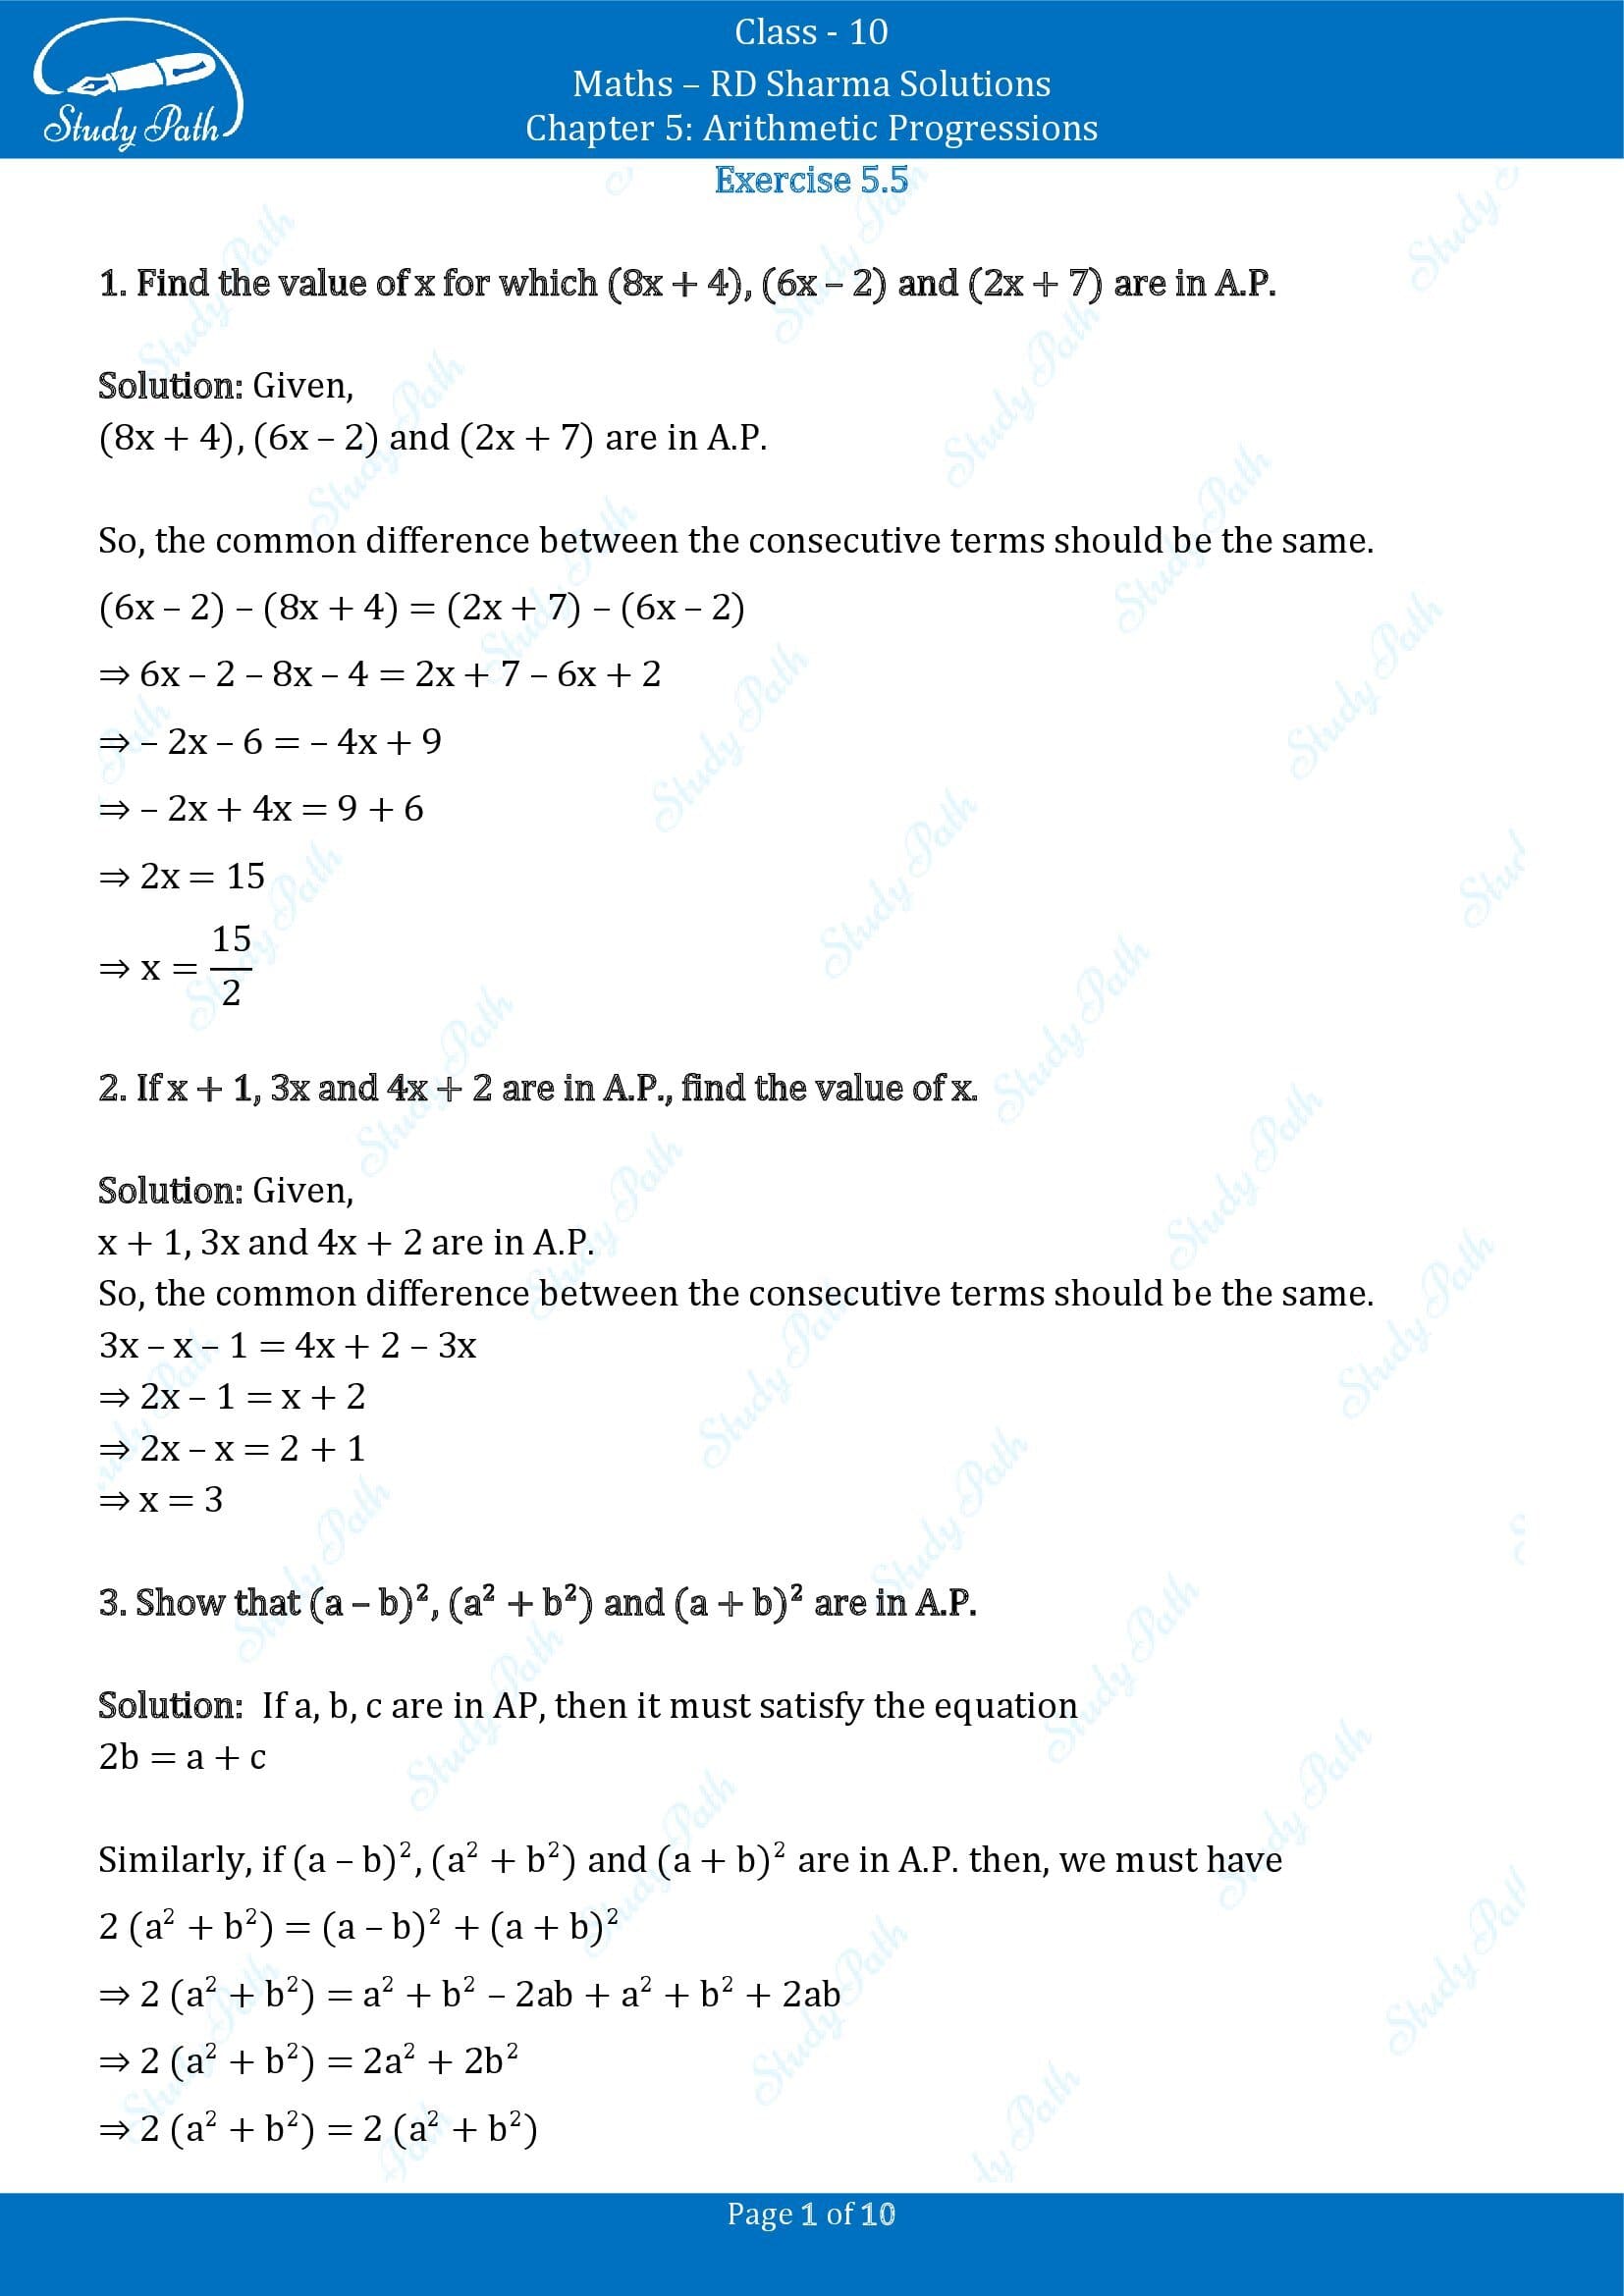 RD Sharma Solutions Class 10 Chapter 5 Arithmetic Progressions Exercise 5.5 00001